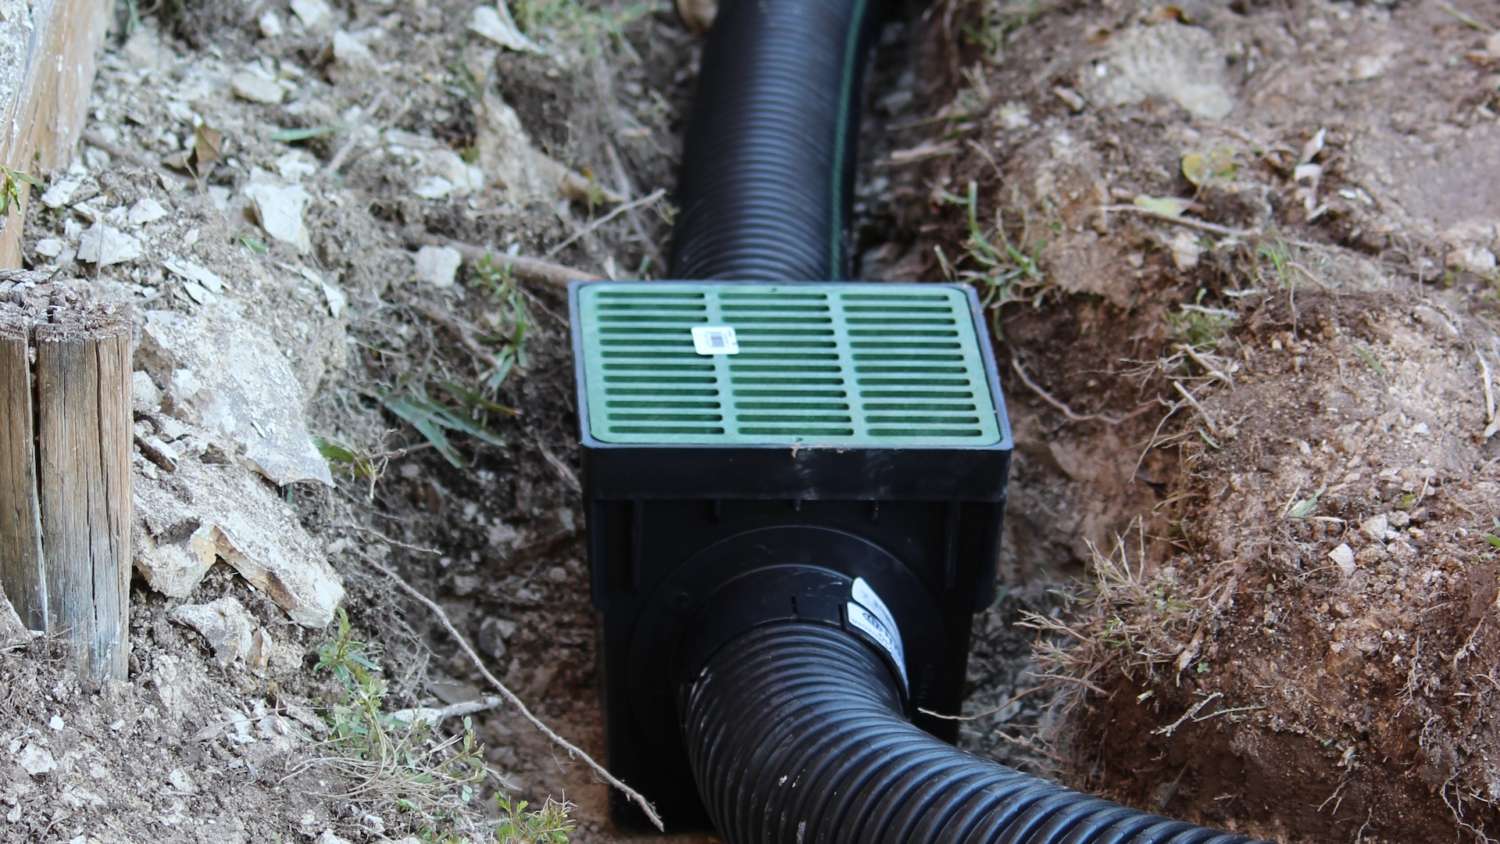 Rain Drain installation and cleaning in Portland